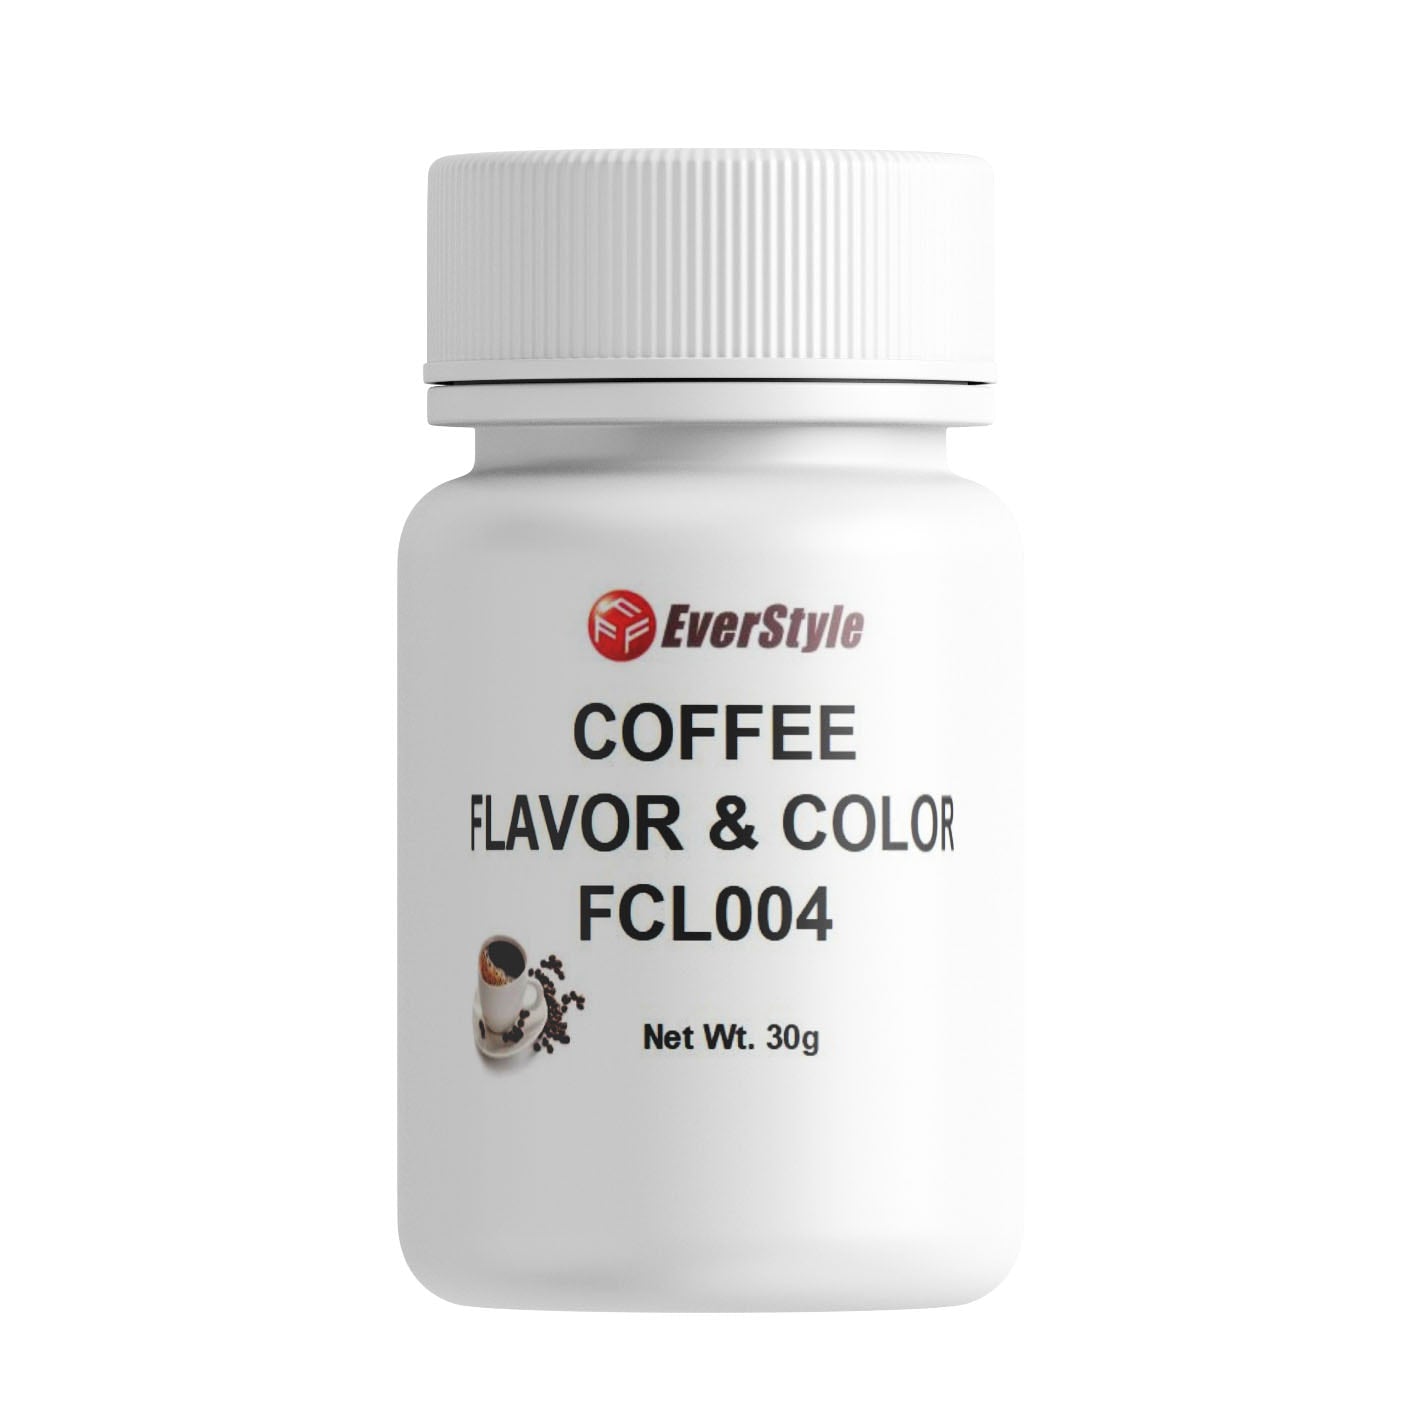 Everstyle Coffee Flavor and Color 30g (FCL004)